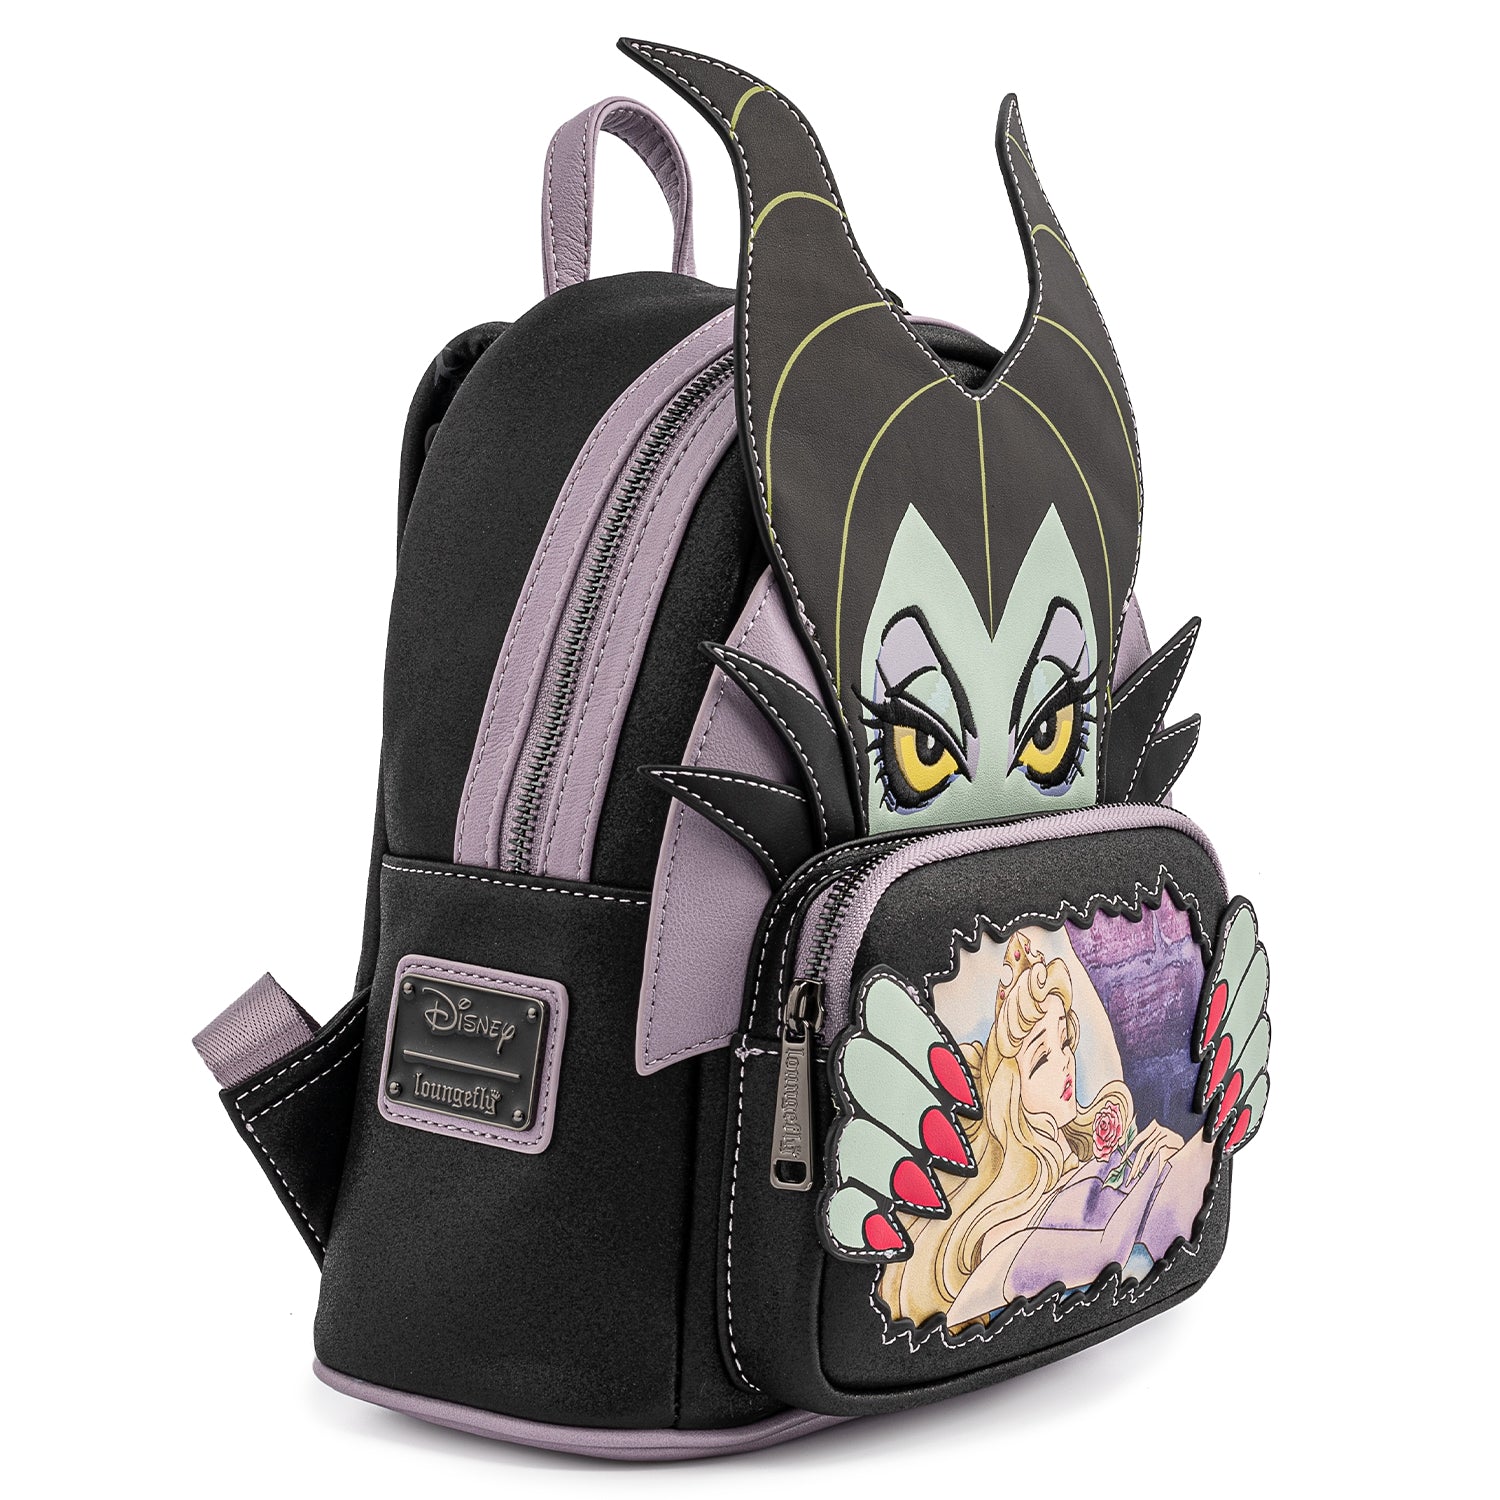 PHOTOS: New Sleeping Beauty Castle Loungefly Backpack Now